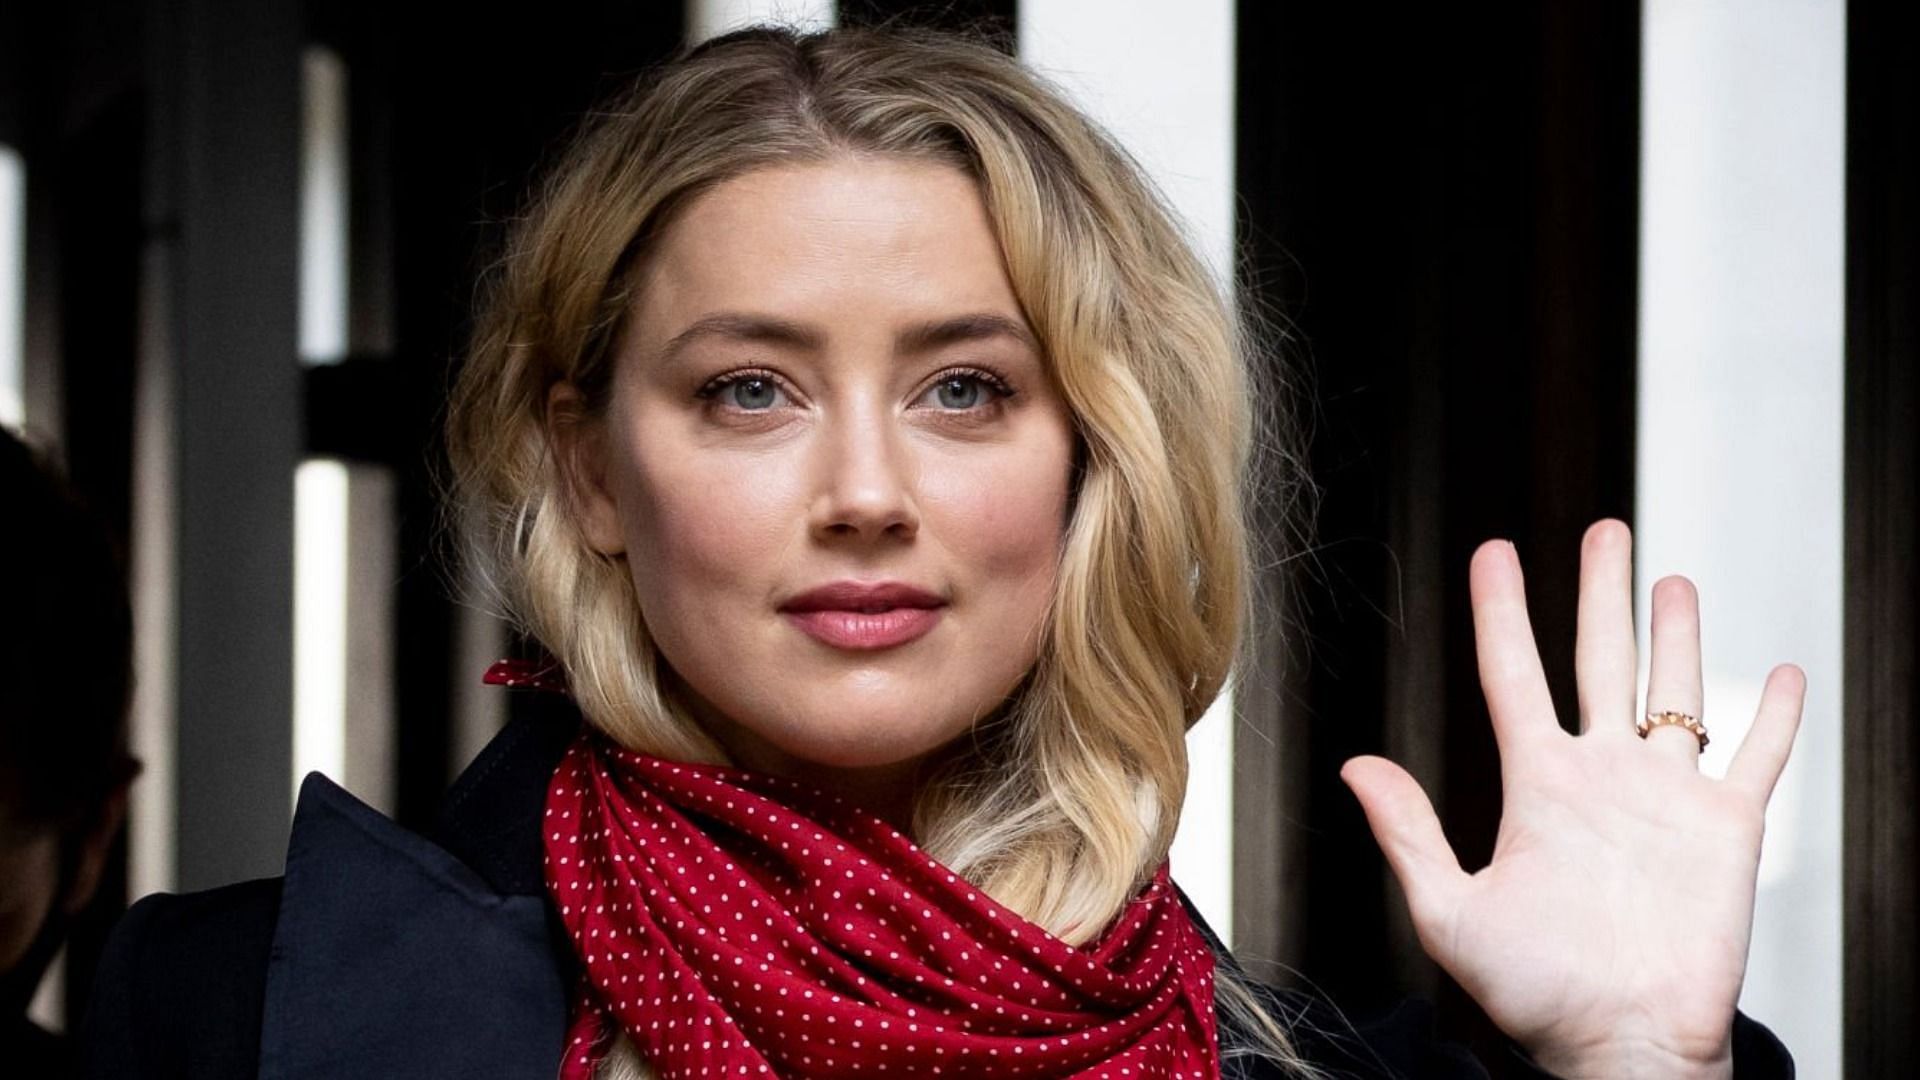 Body language expert Judy James analyzed Amber Heard&#039;s movements during defamation trial testimony (Image via Getty Images)